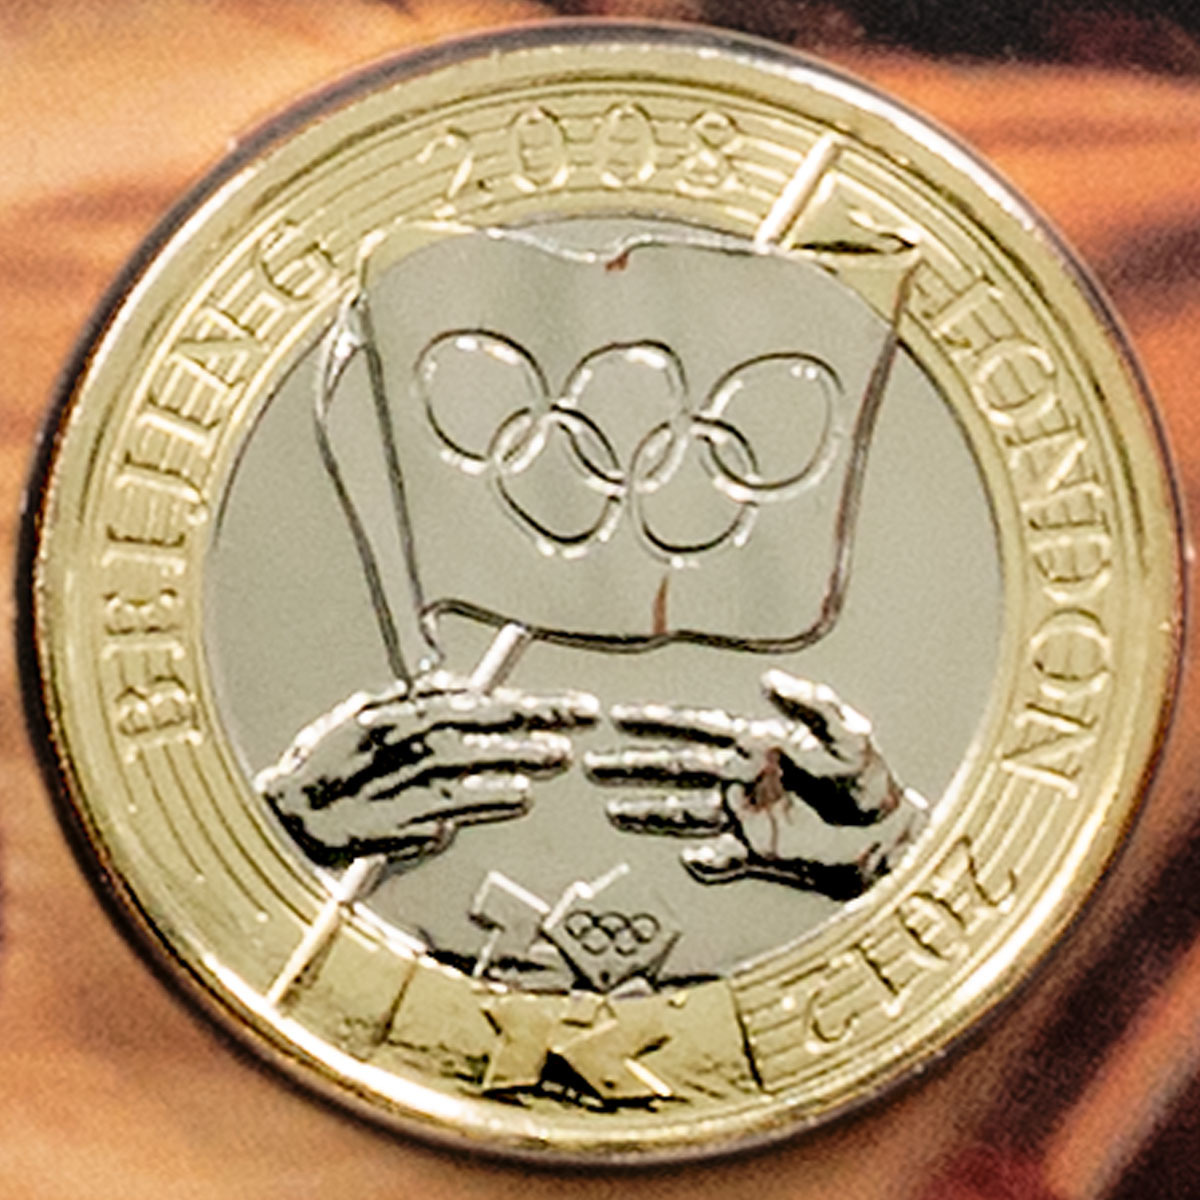 LUKHBU 2008 Olympics Handover To London Ceremony Two Pound Brilliant Uncirculated Coin In Folder Reverse